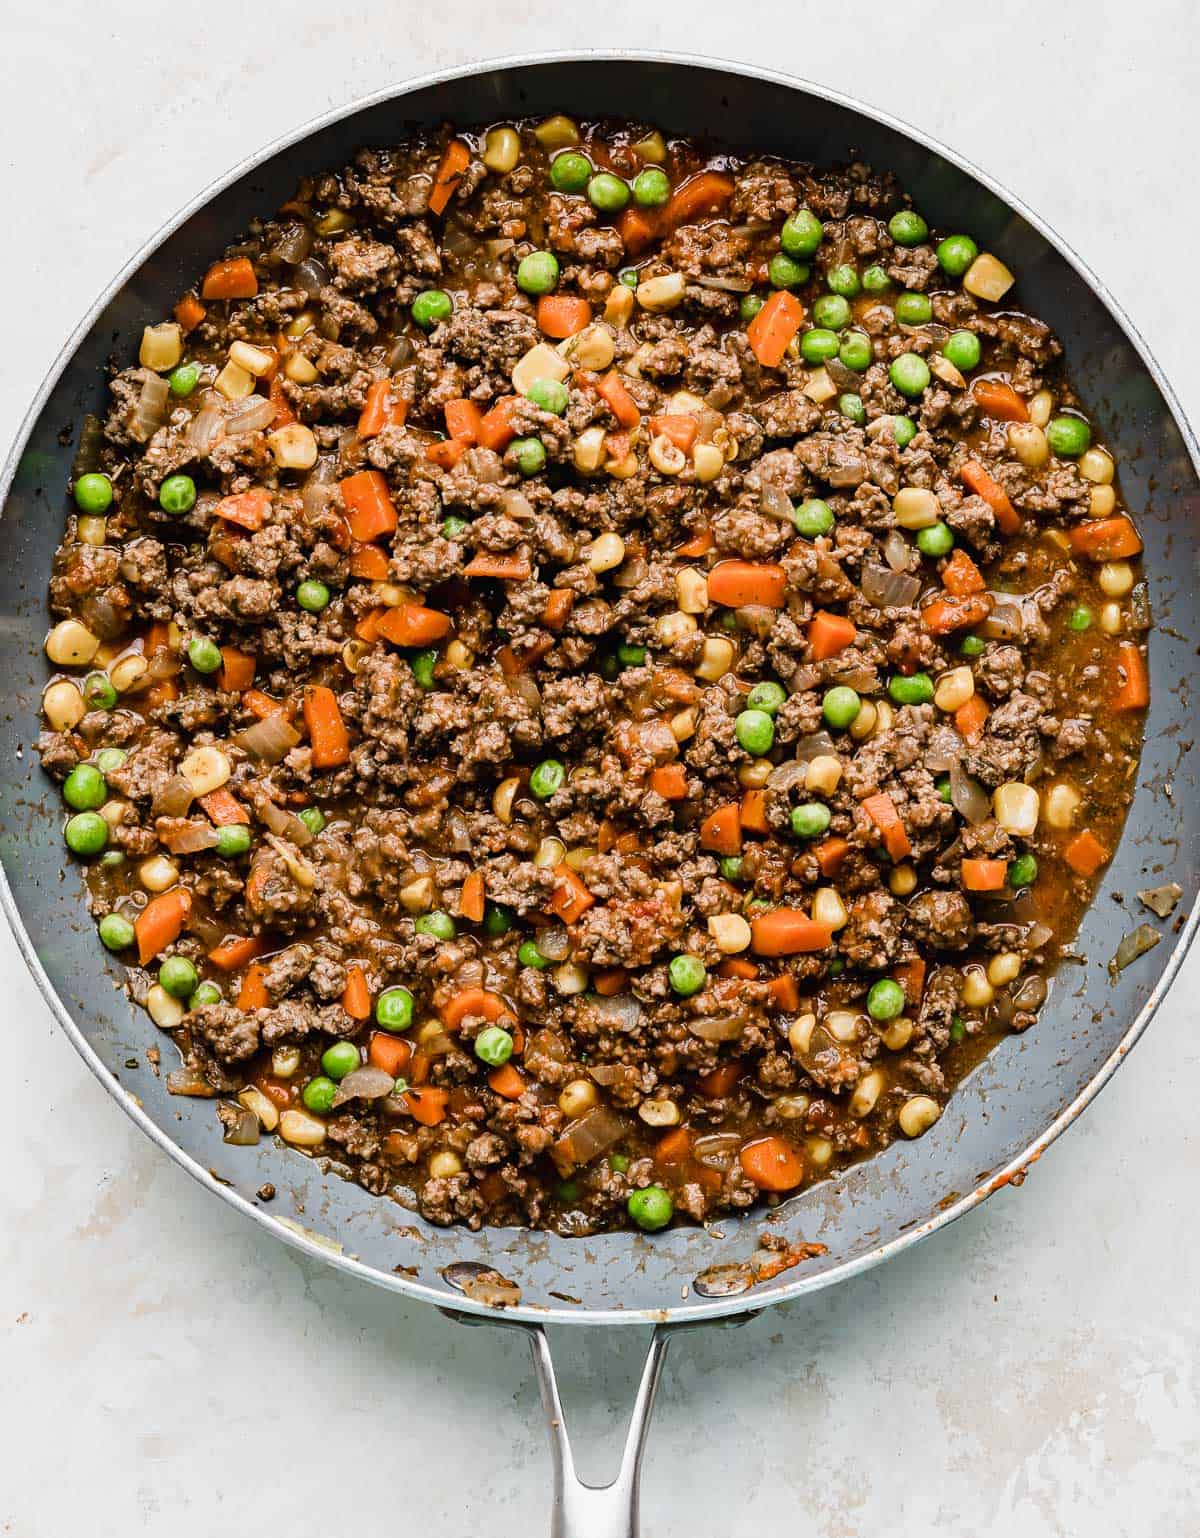 A gray skillet on a white background filled with the best shepherd's pie filling.